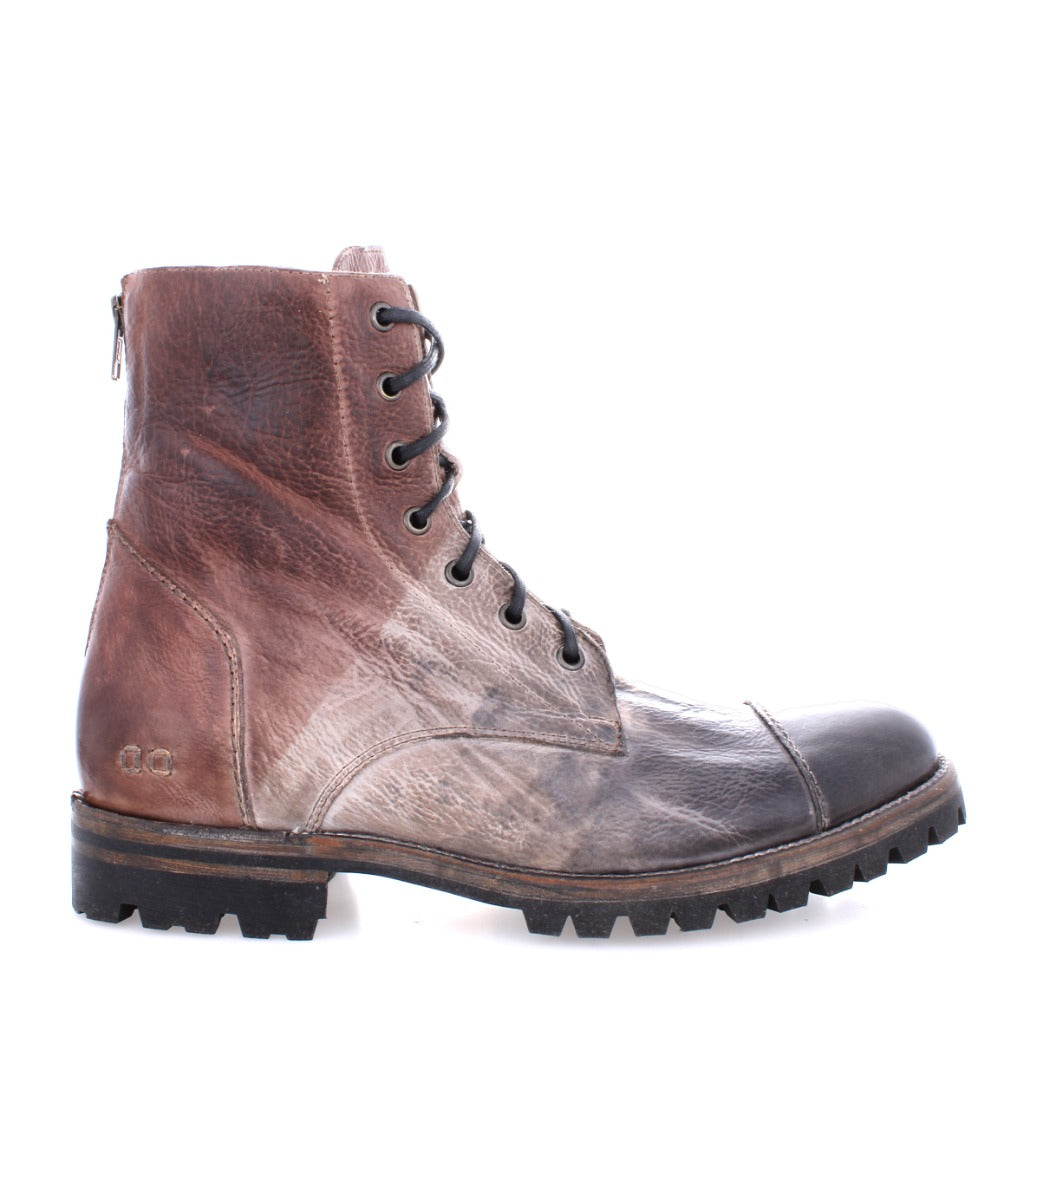 A single Protege Trek brown leather lace-up combat style boot with a rugged sole, isolated on a white background by Bed Stu.